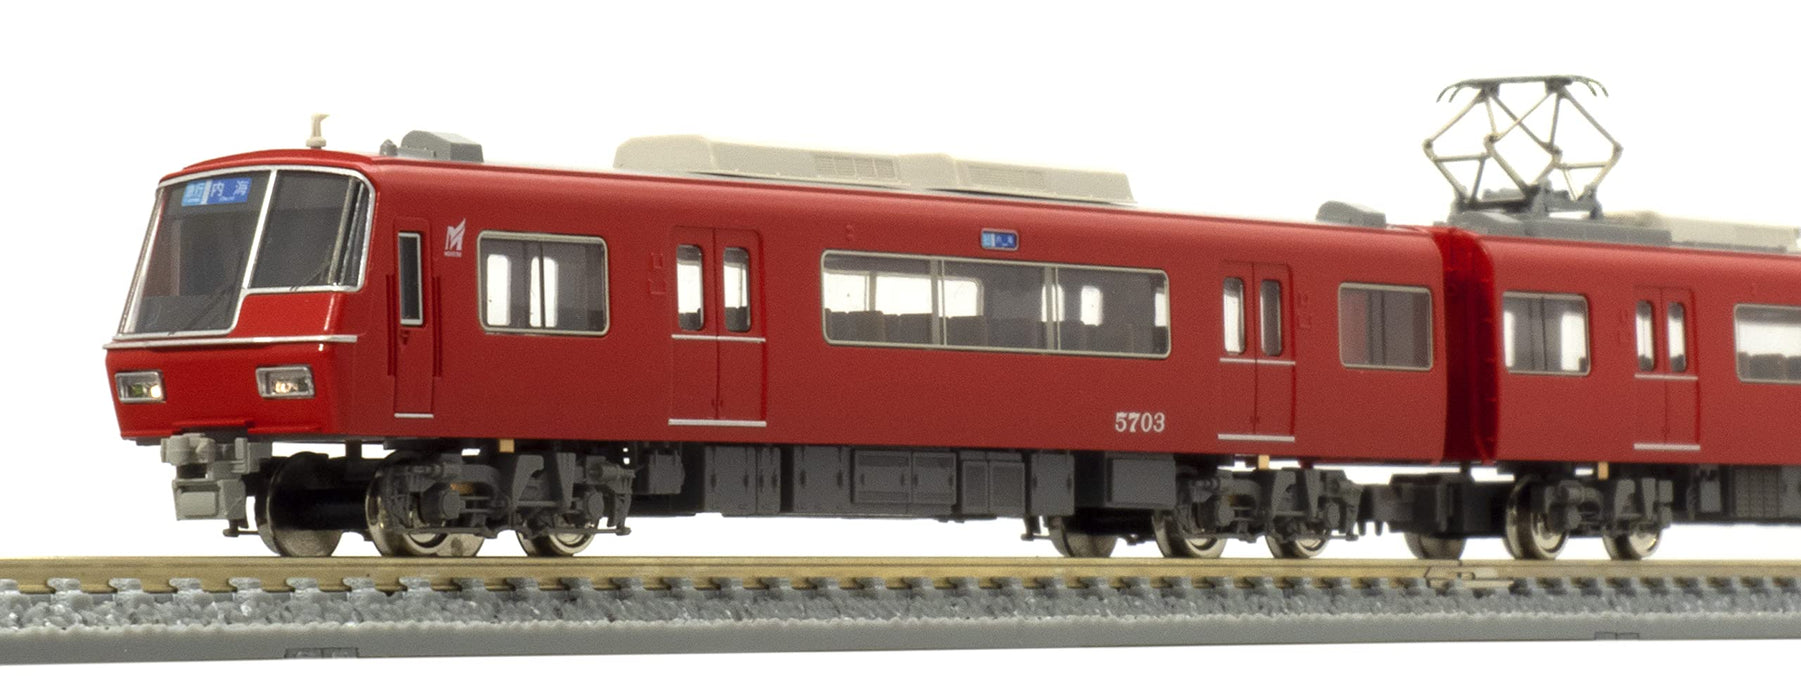 GREENMAX  50700 Meitetsu Series 5700  5703 + 5704 Configuration 8 Cars Set  N Scale